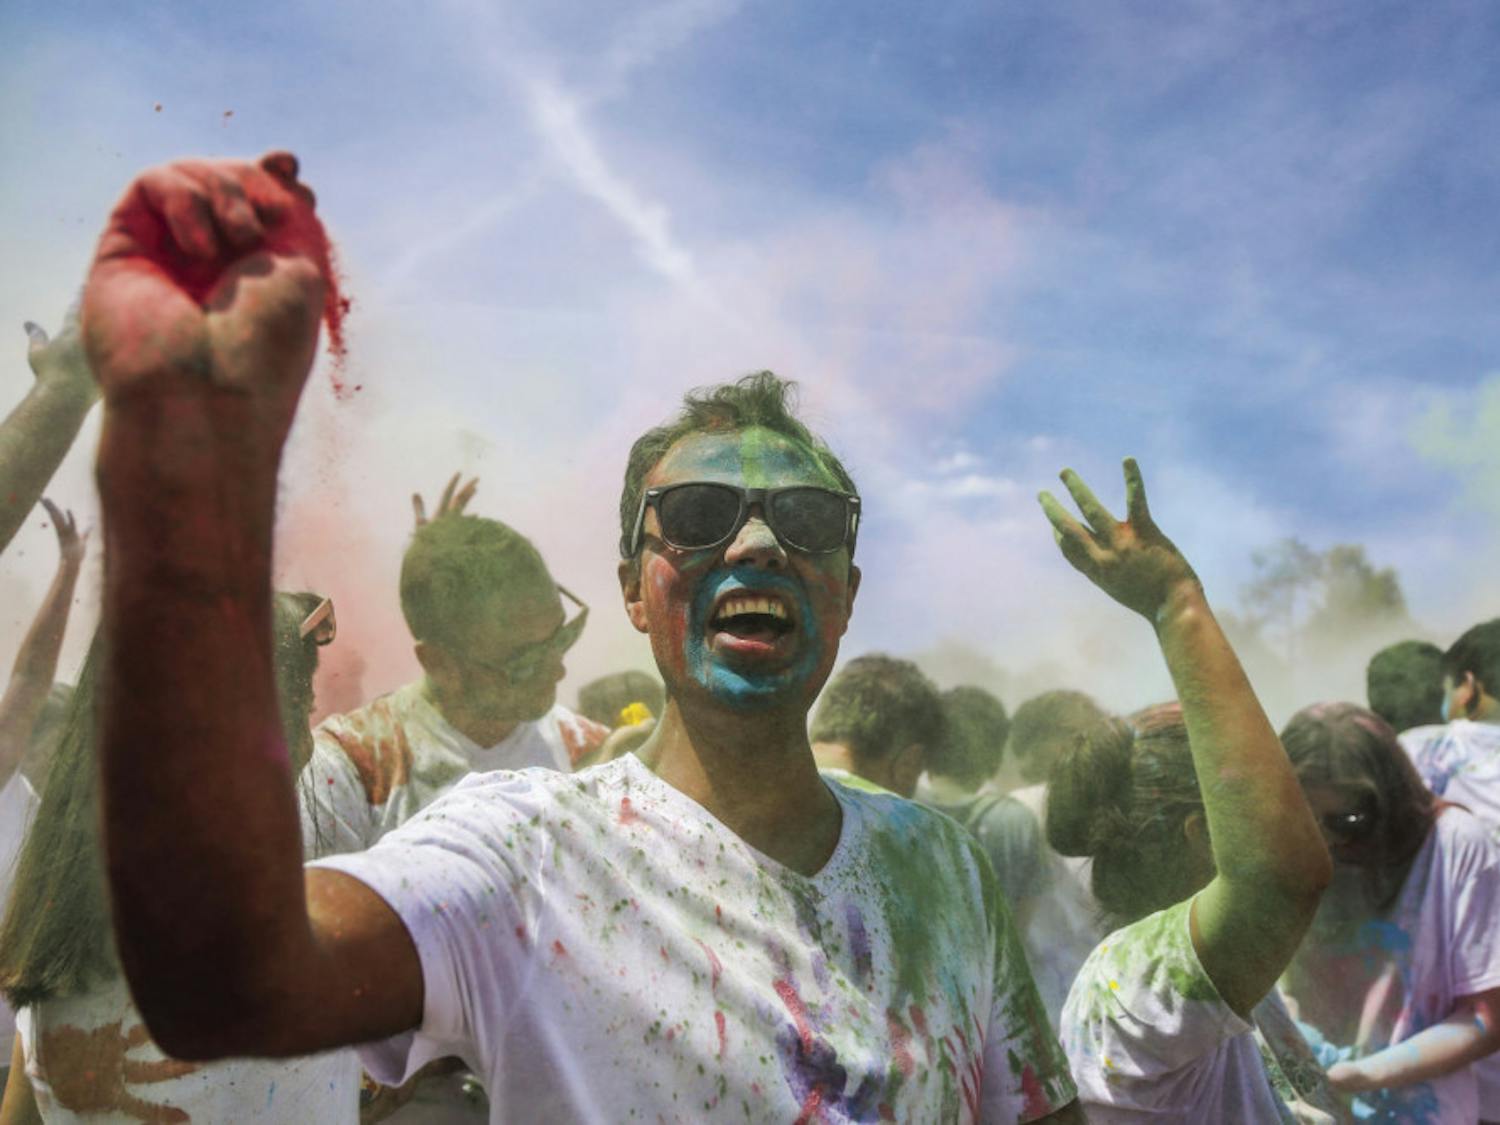 Khem B. Banjara, a 30-year-old neuro technologist at UF Health Shands Cancer Hospital, throws paint during the UF Holi Festival of Colors, organized by the UF Indian Student Association and Student Government, on Sunday afternoon. Above, more than 1,000 people attended the event, which lasted more than three hours.